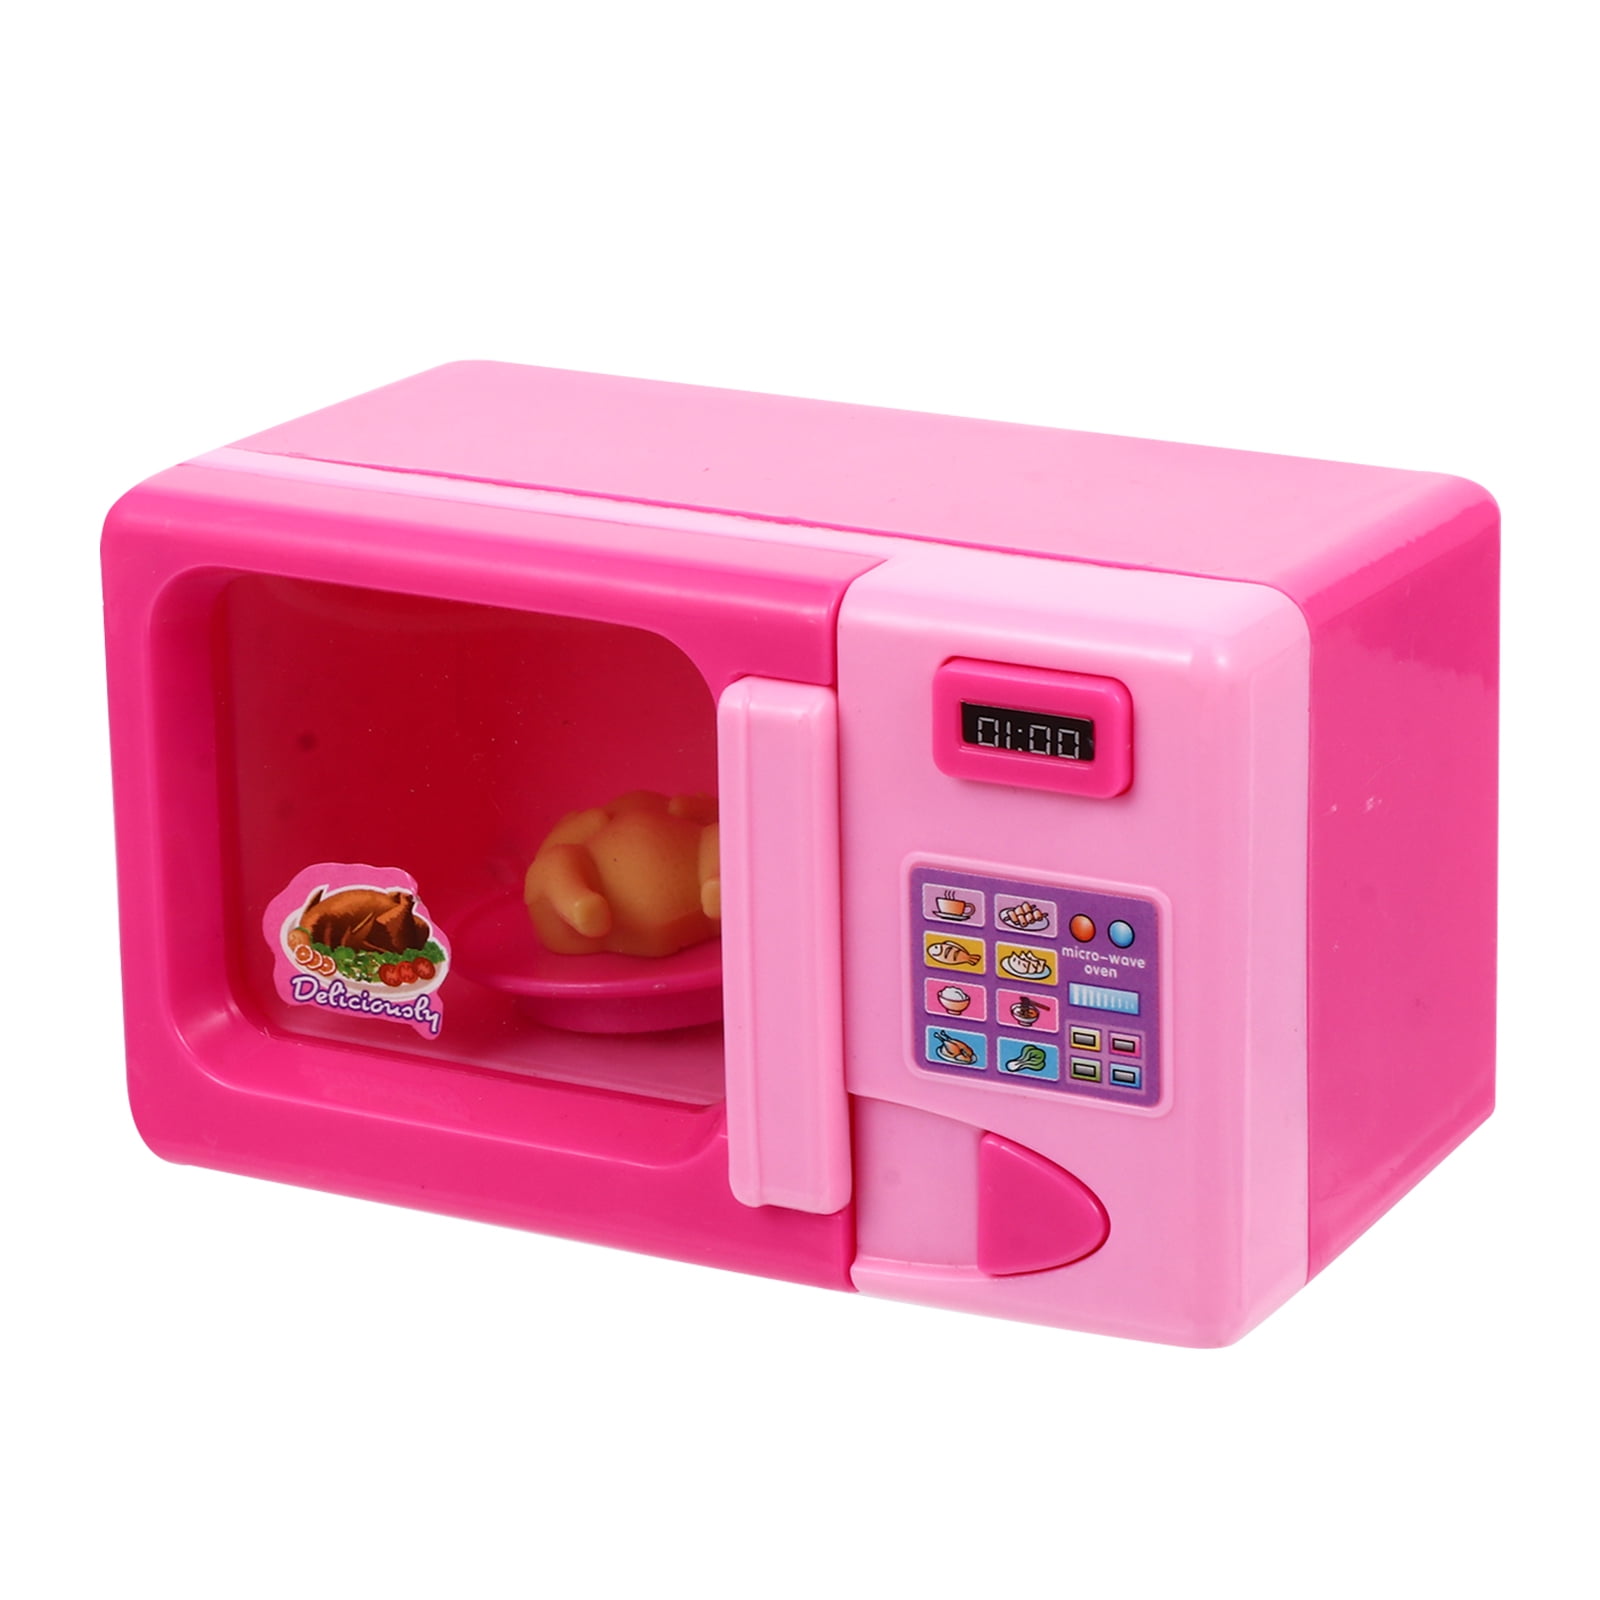 Realistic Microwave Oven, Miniature Oven with food,Party